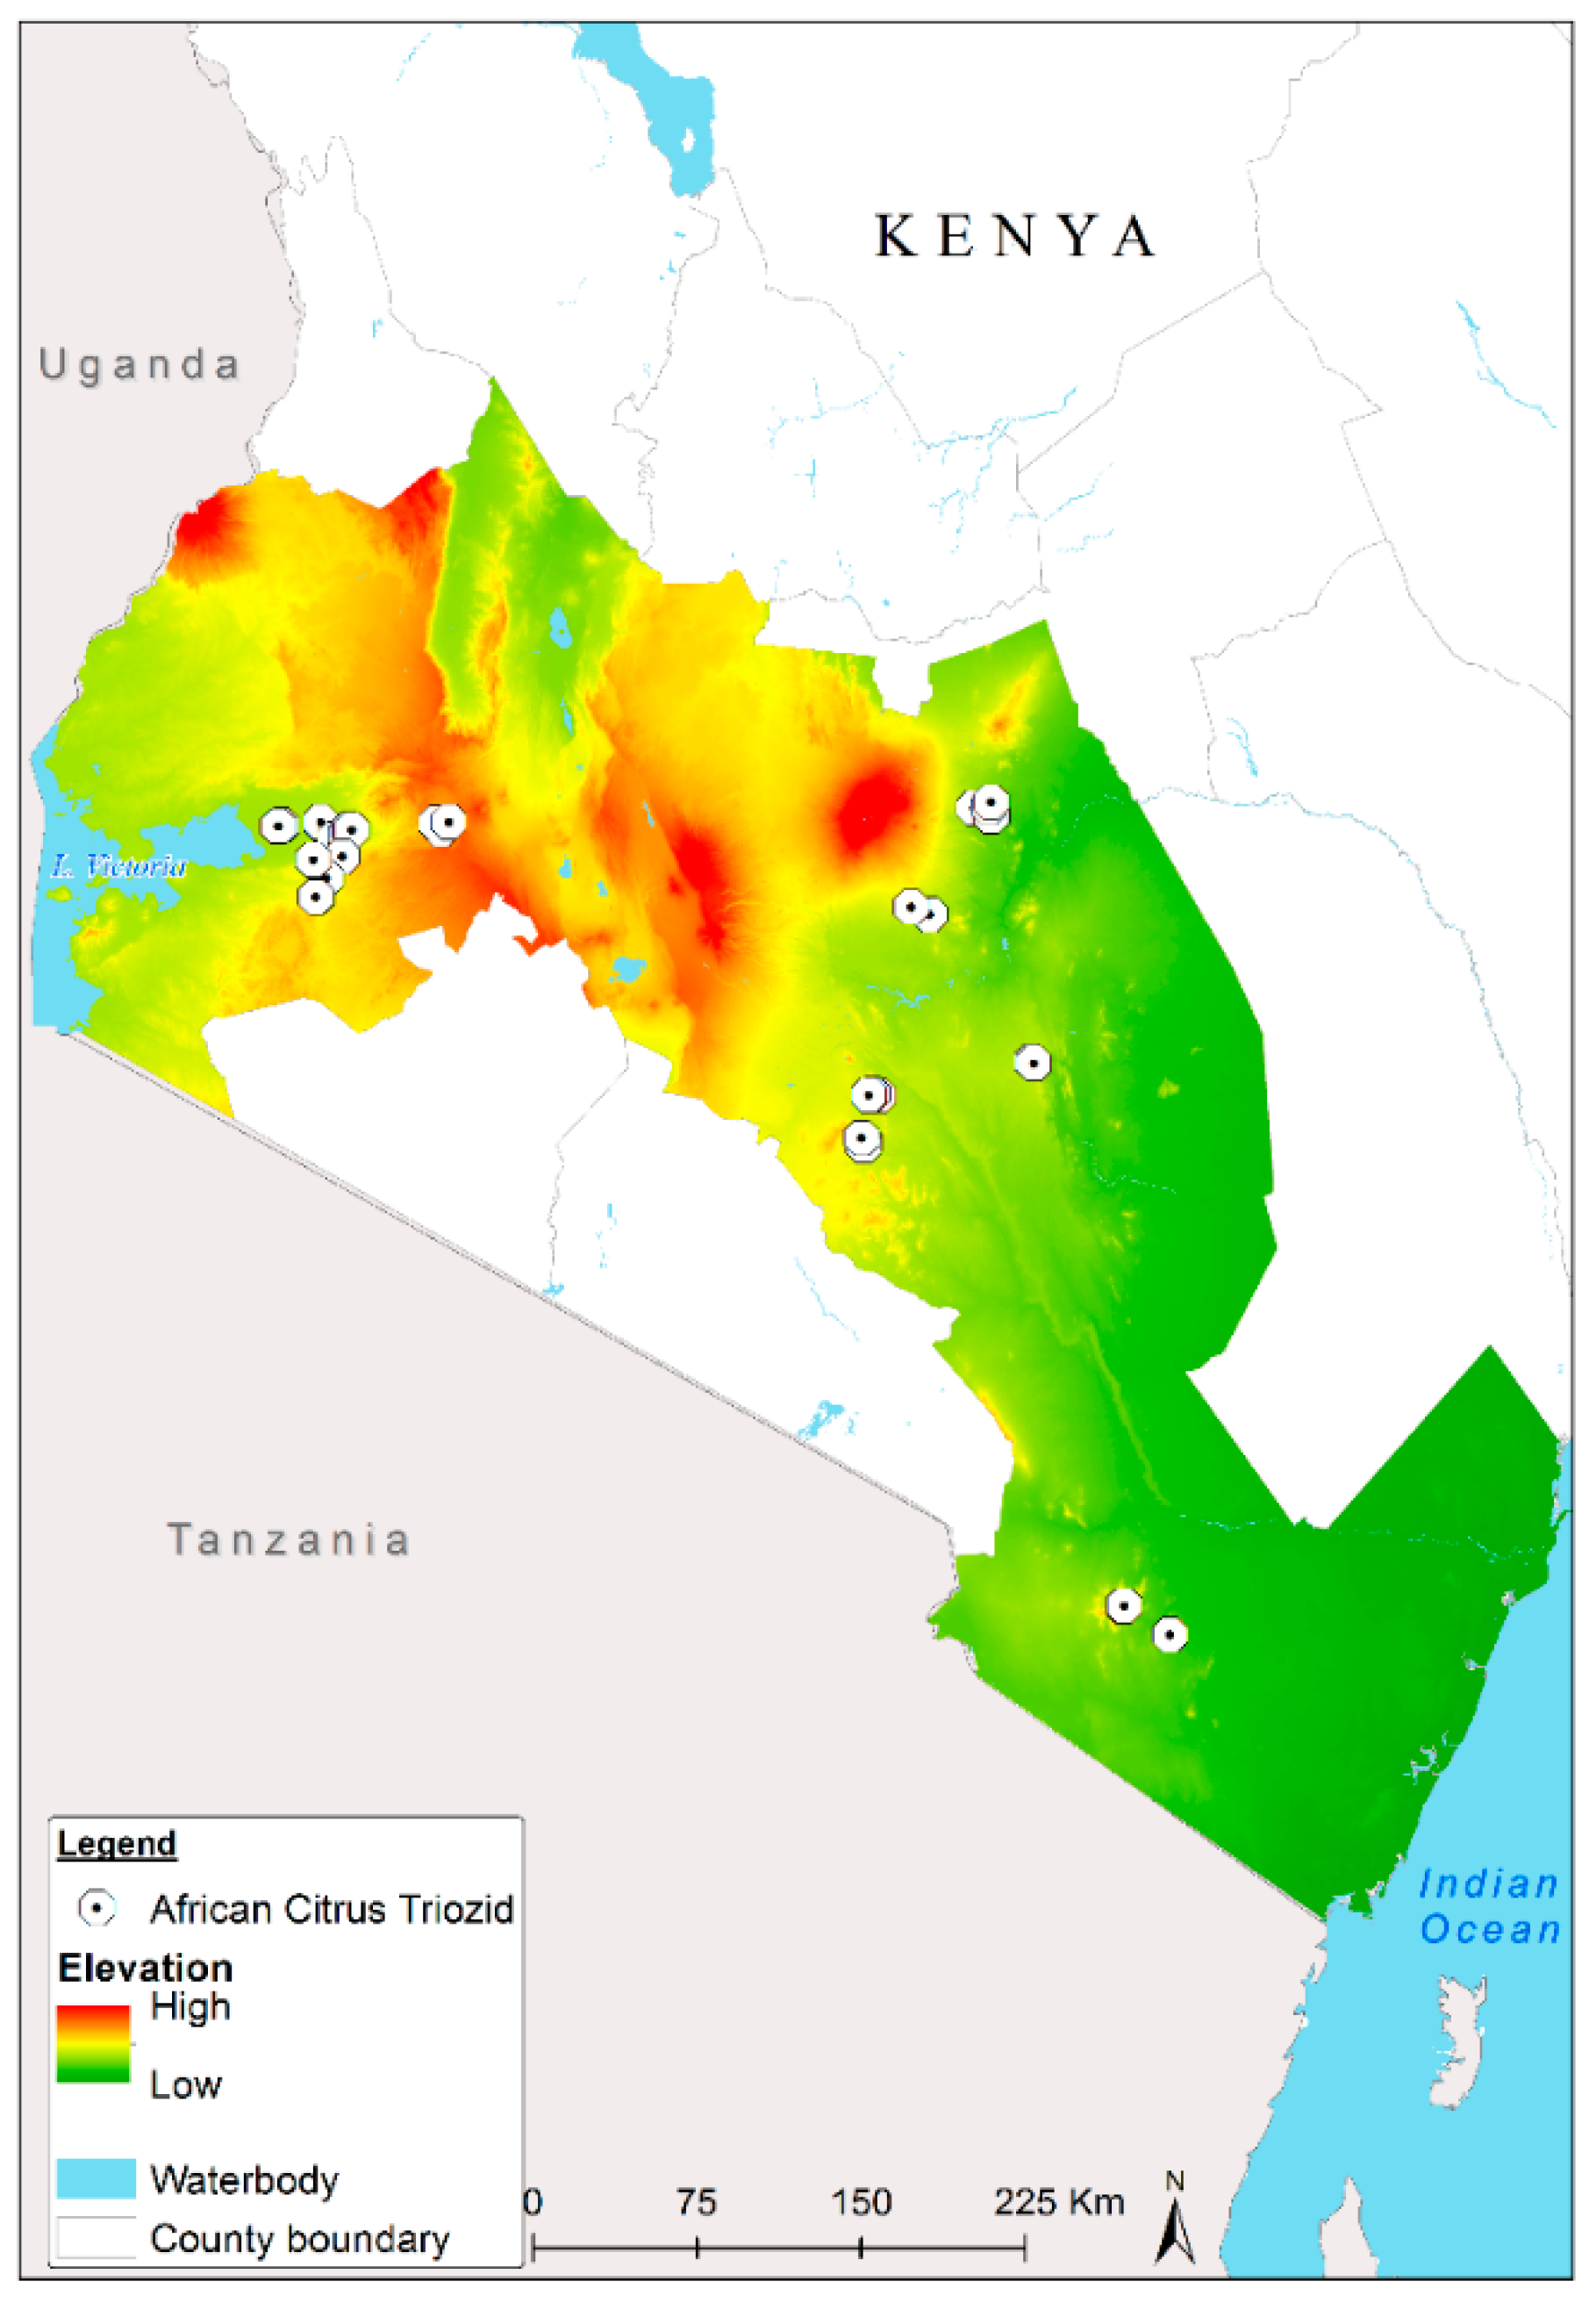 IJGI | Free Full-Text | Importance of Remotely-Sensed Vegetation Variables  for Predicting the Spatial Distribution of African Citrus Triozid (Trioza  erytreae) in Kenya | HTML